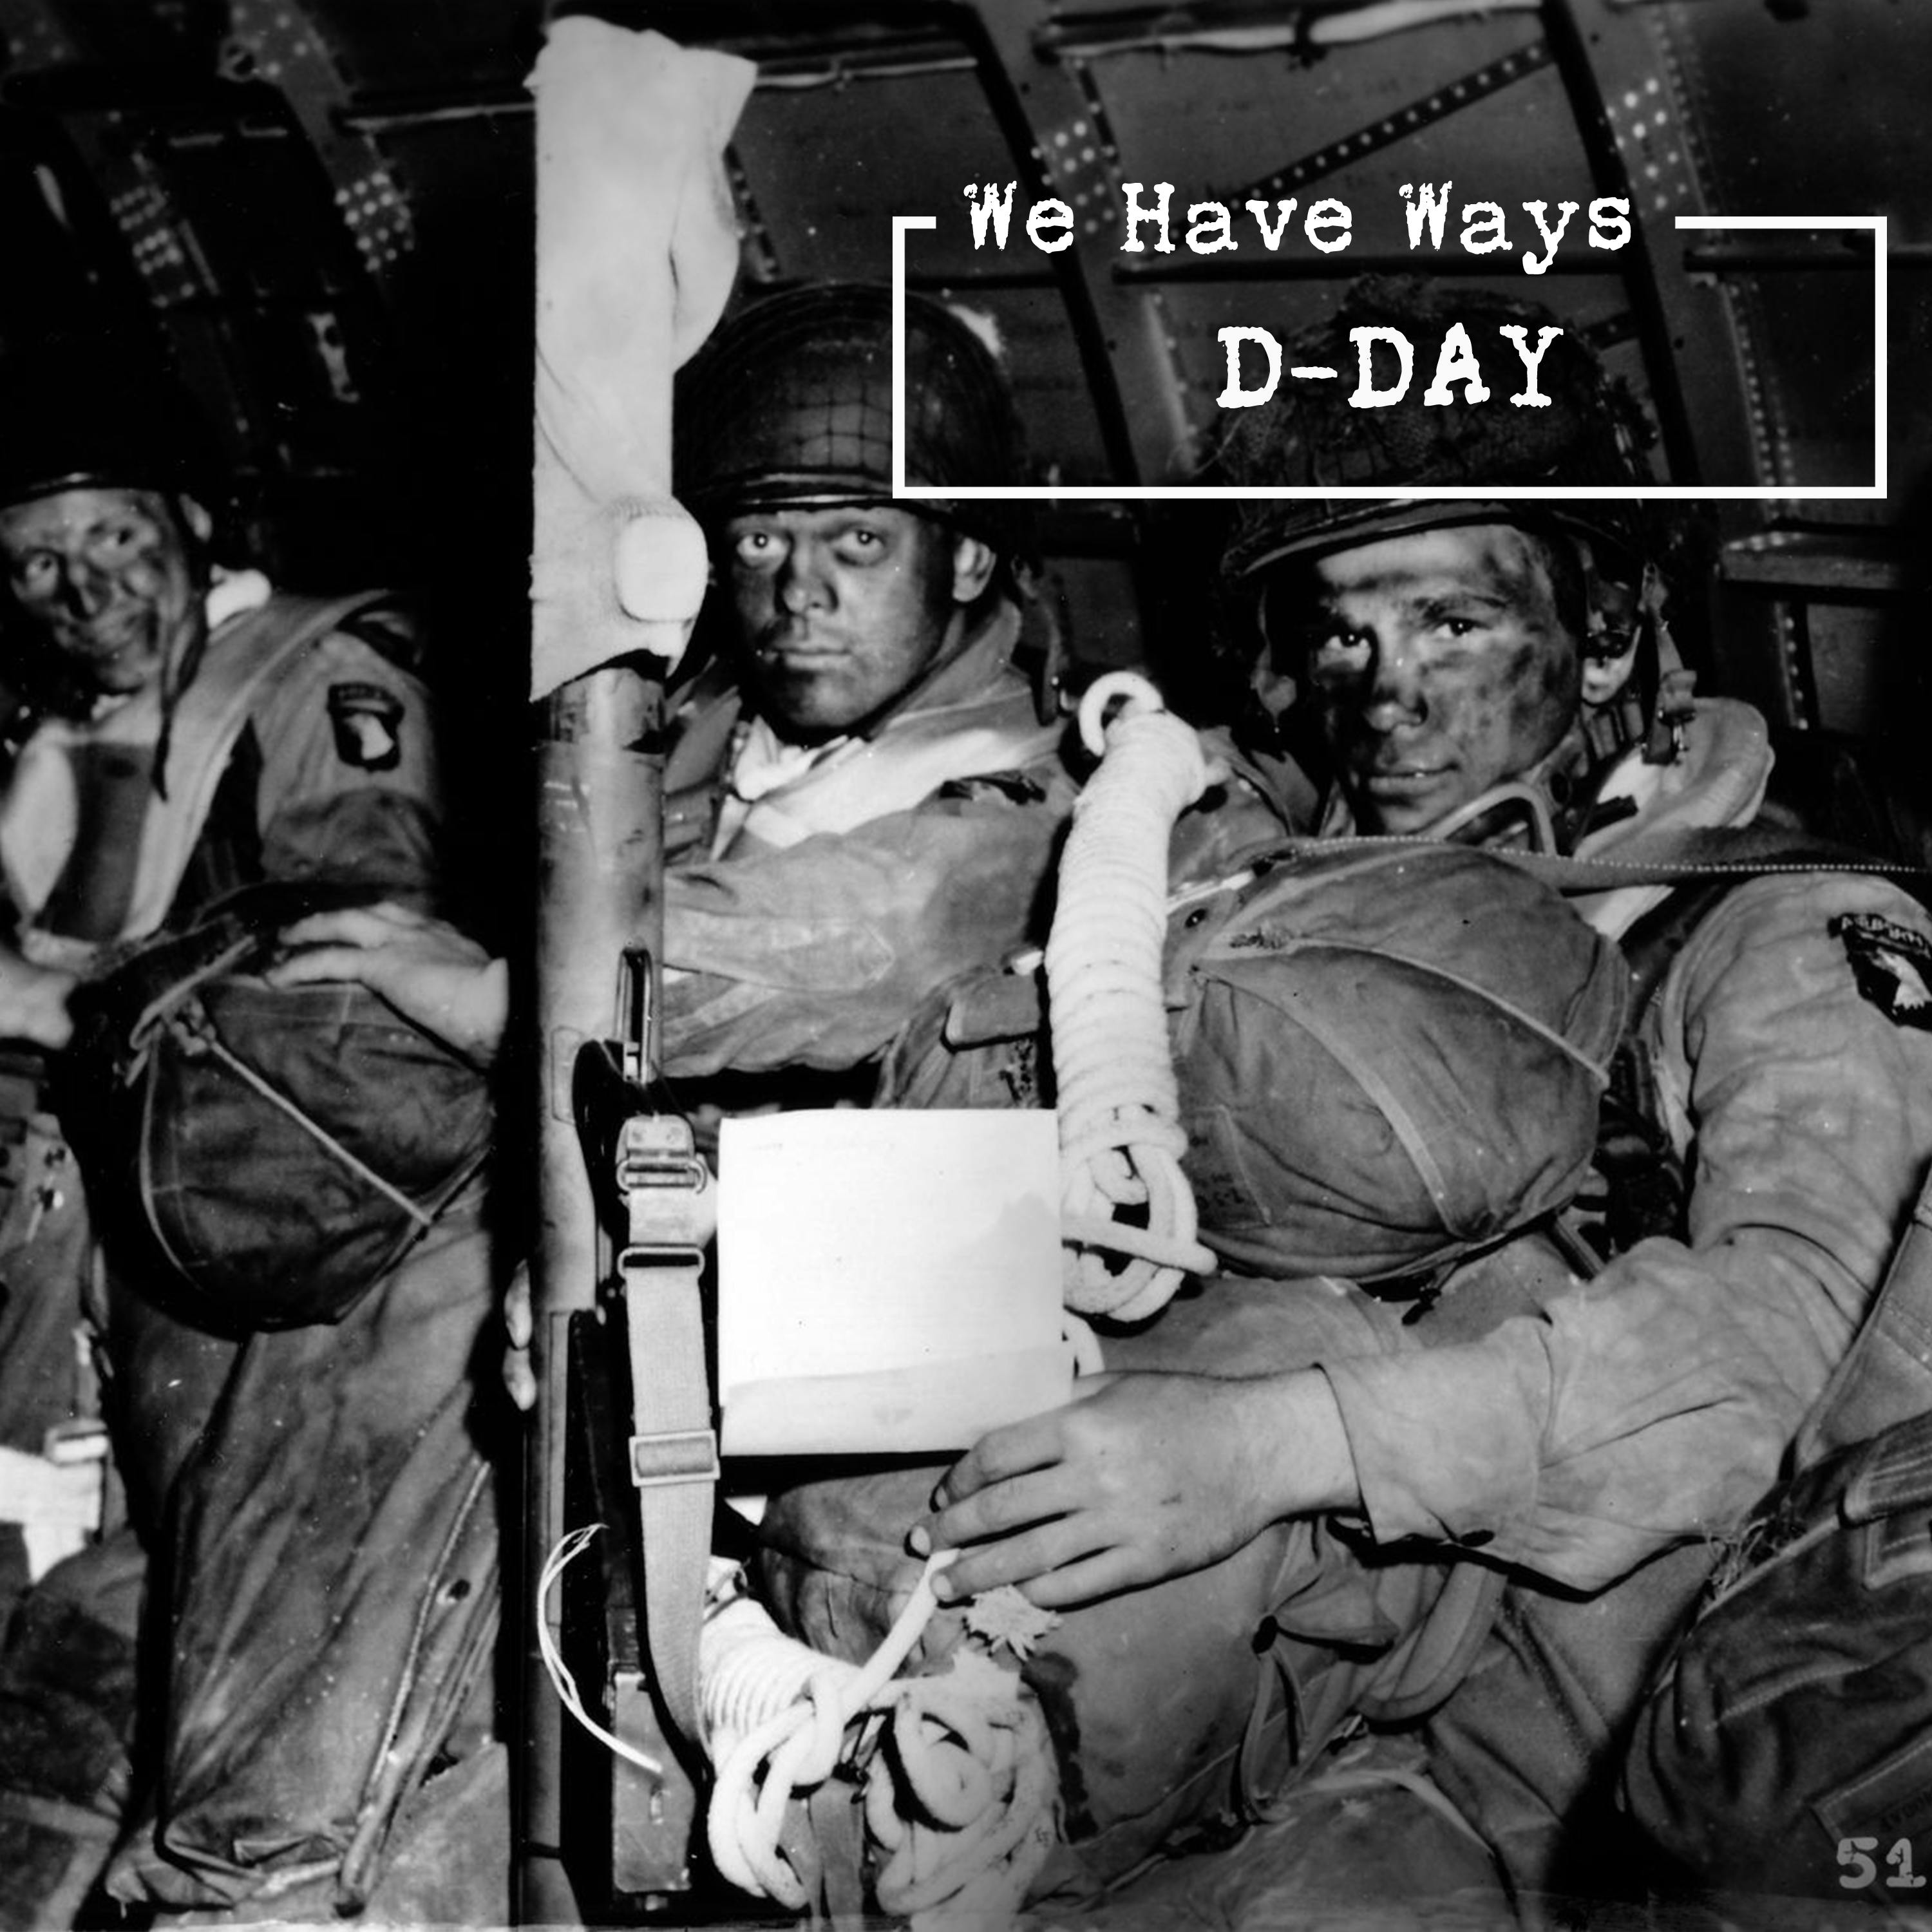 D-Day: Minelaying & The Airborne Drop (Episode 4)